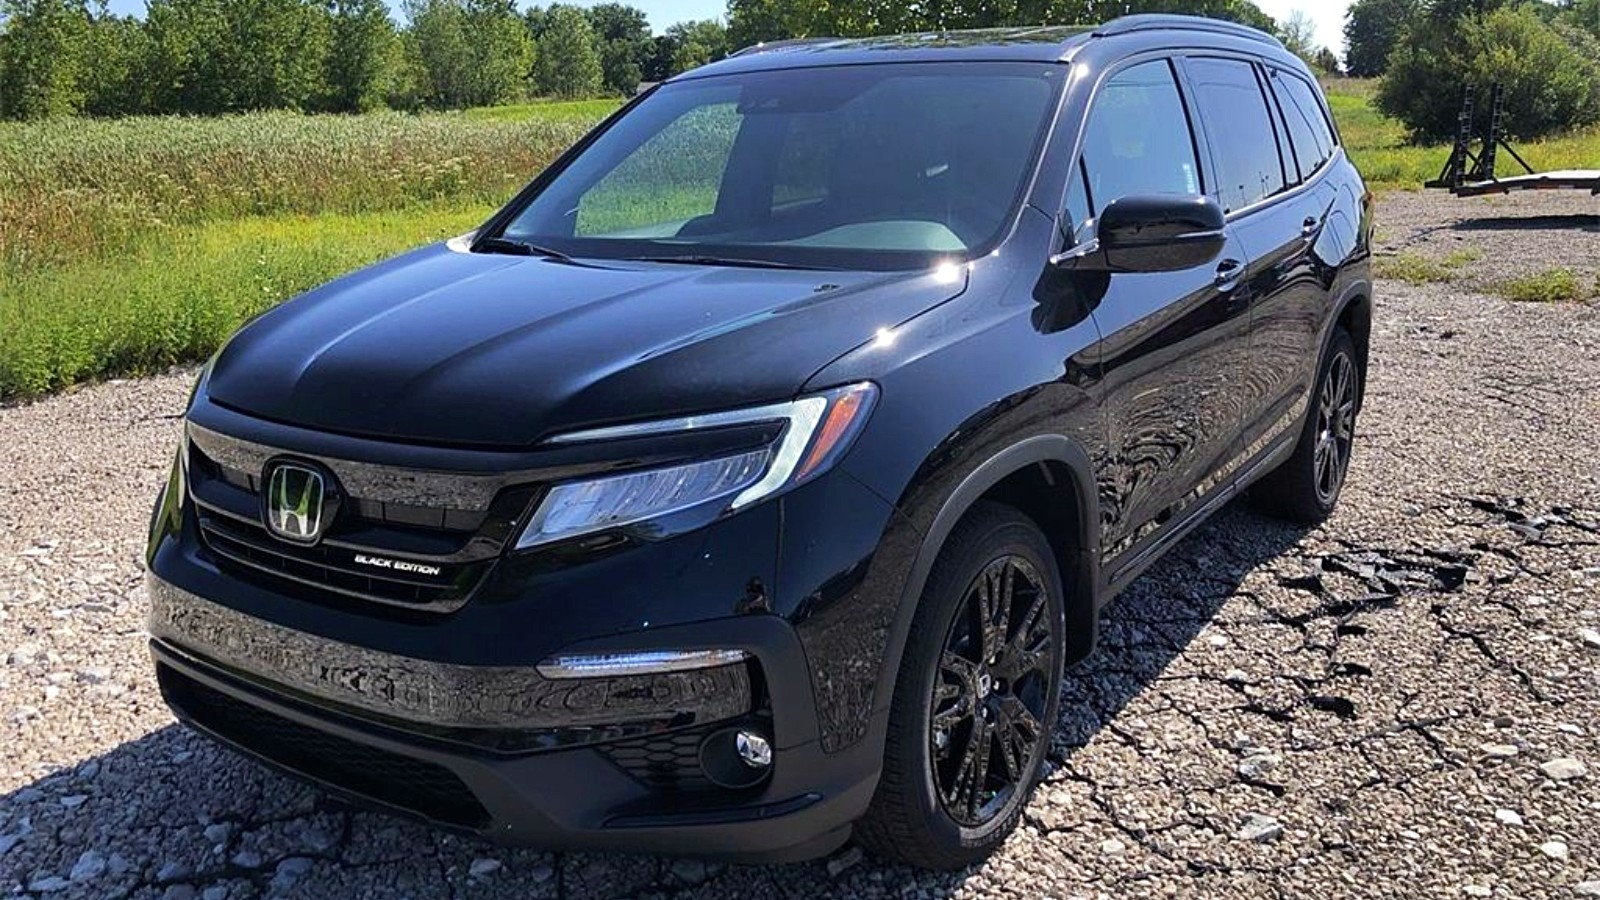 7 Things to Know About the 2020 Honda Pilot Black Edition Trim